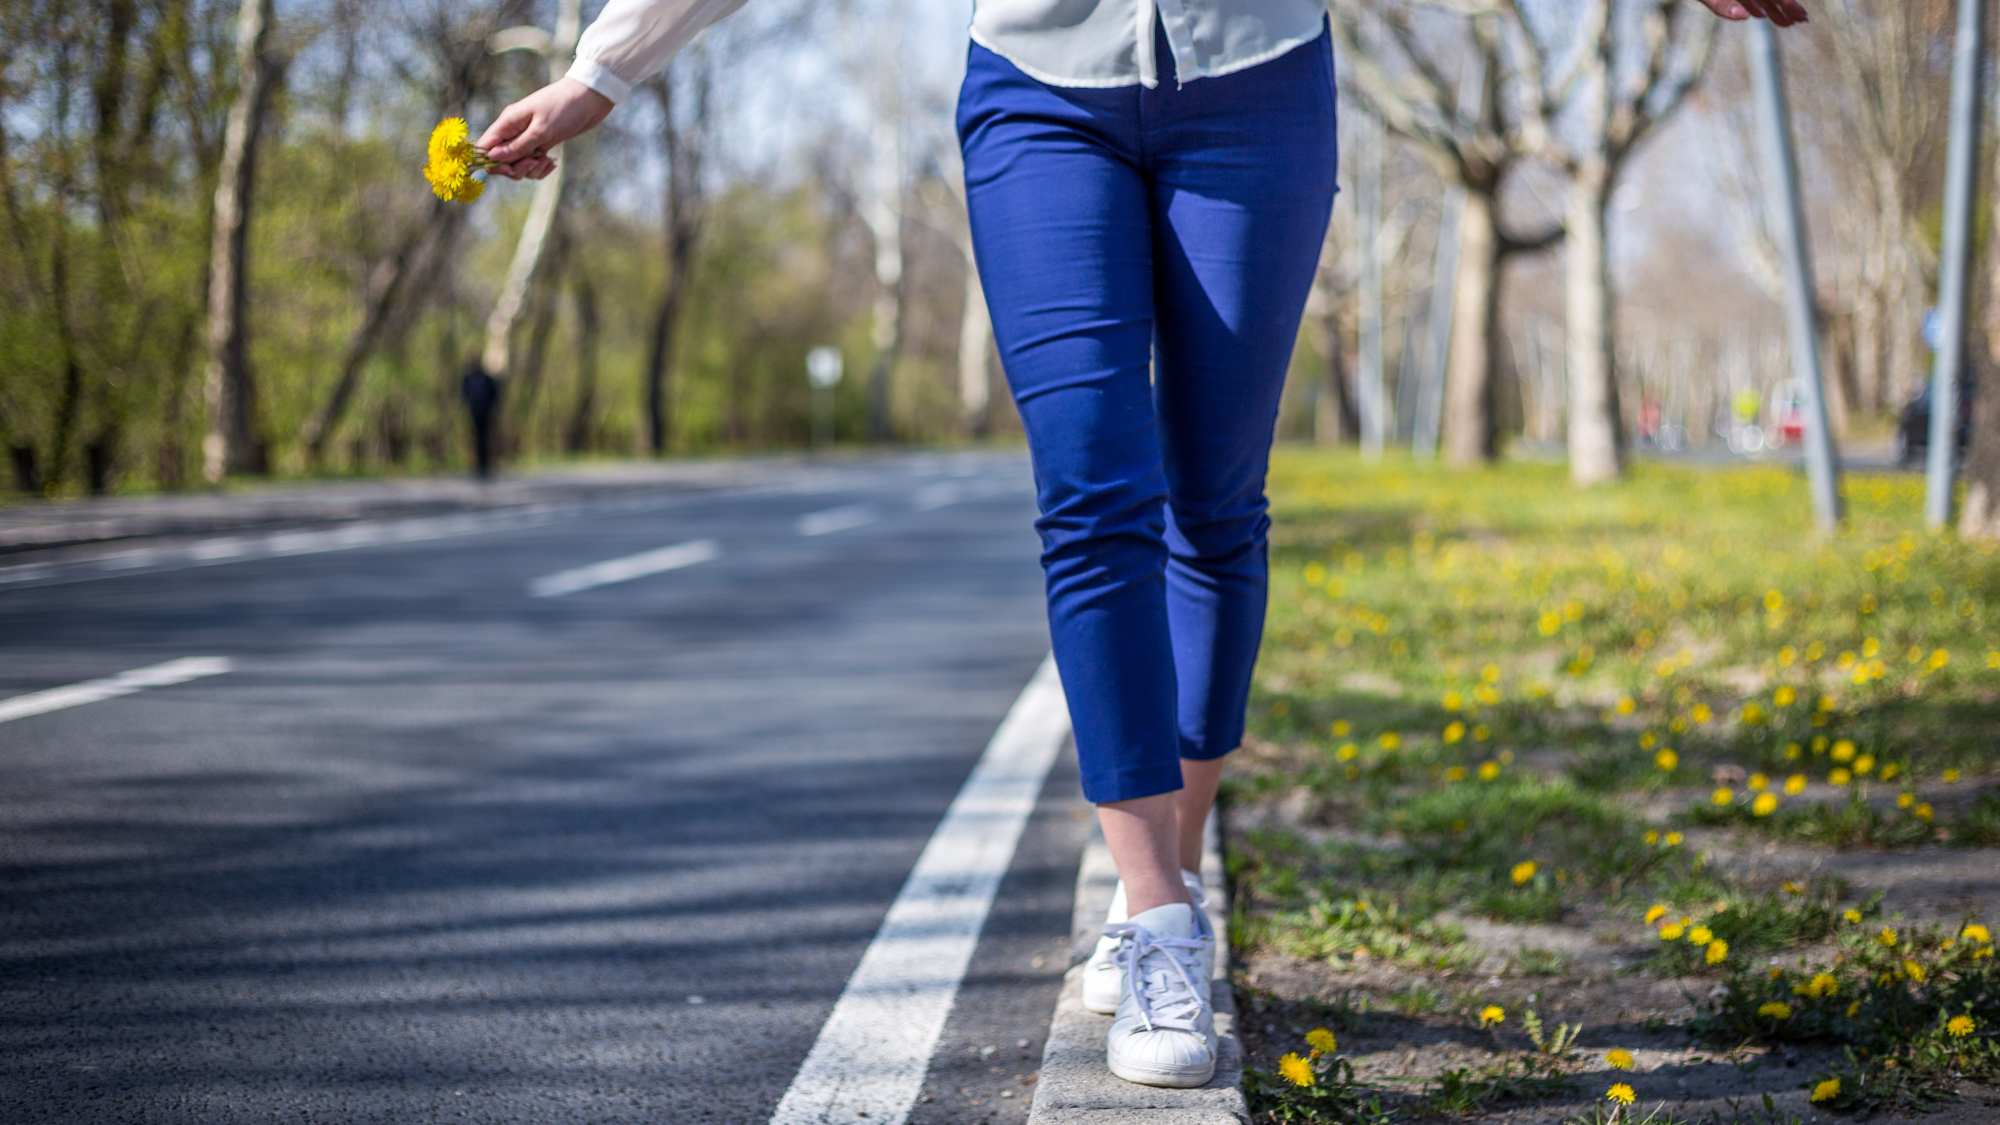 An image of a woman from the waist down walking and balancing on the white line at the side of a road. She has yellow flowers in her hand.